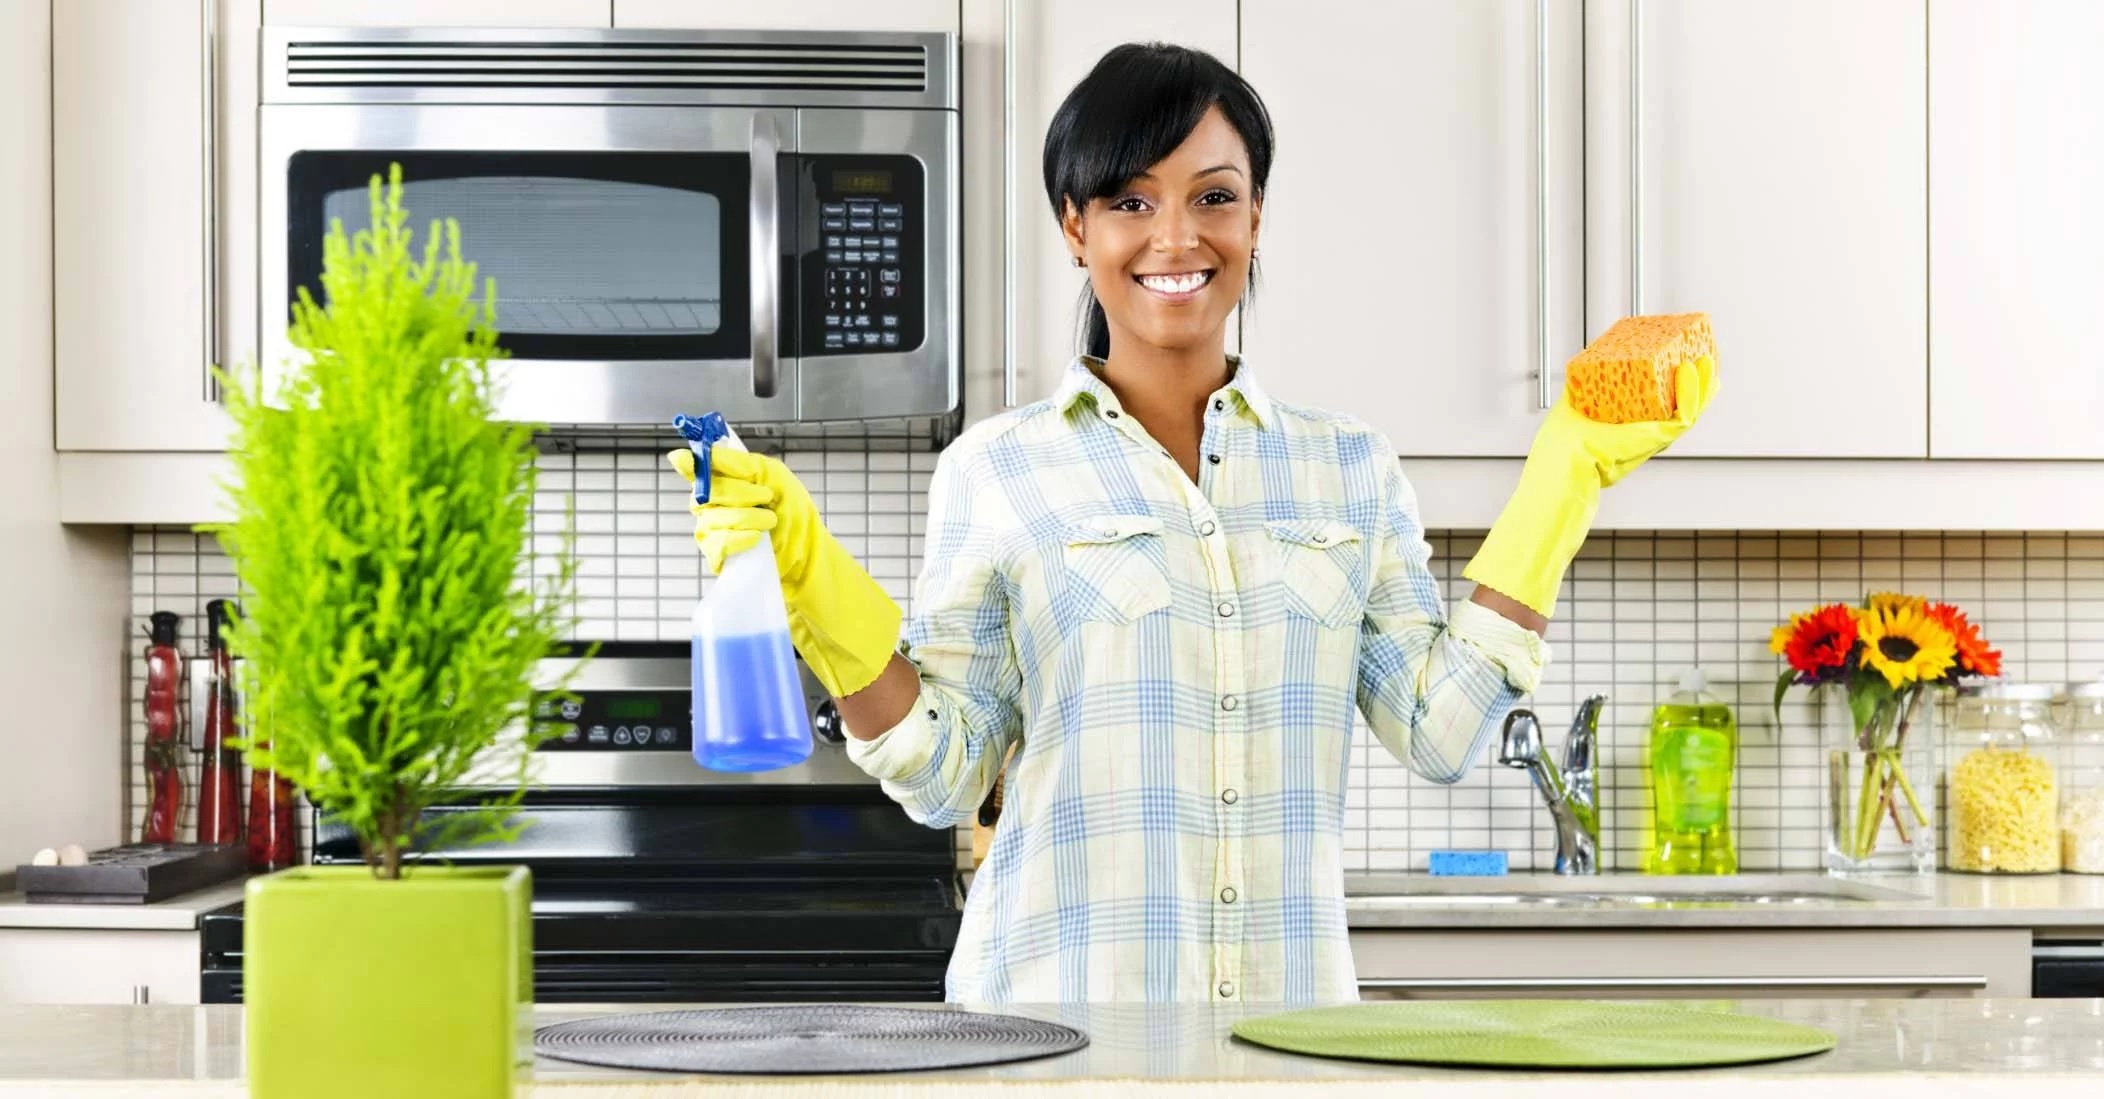 5 Cleaning Hacks for Your Home That Will Make Your Life Easier